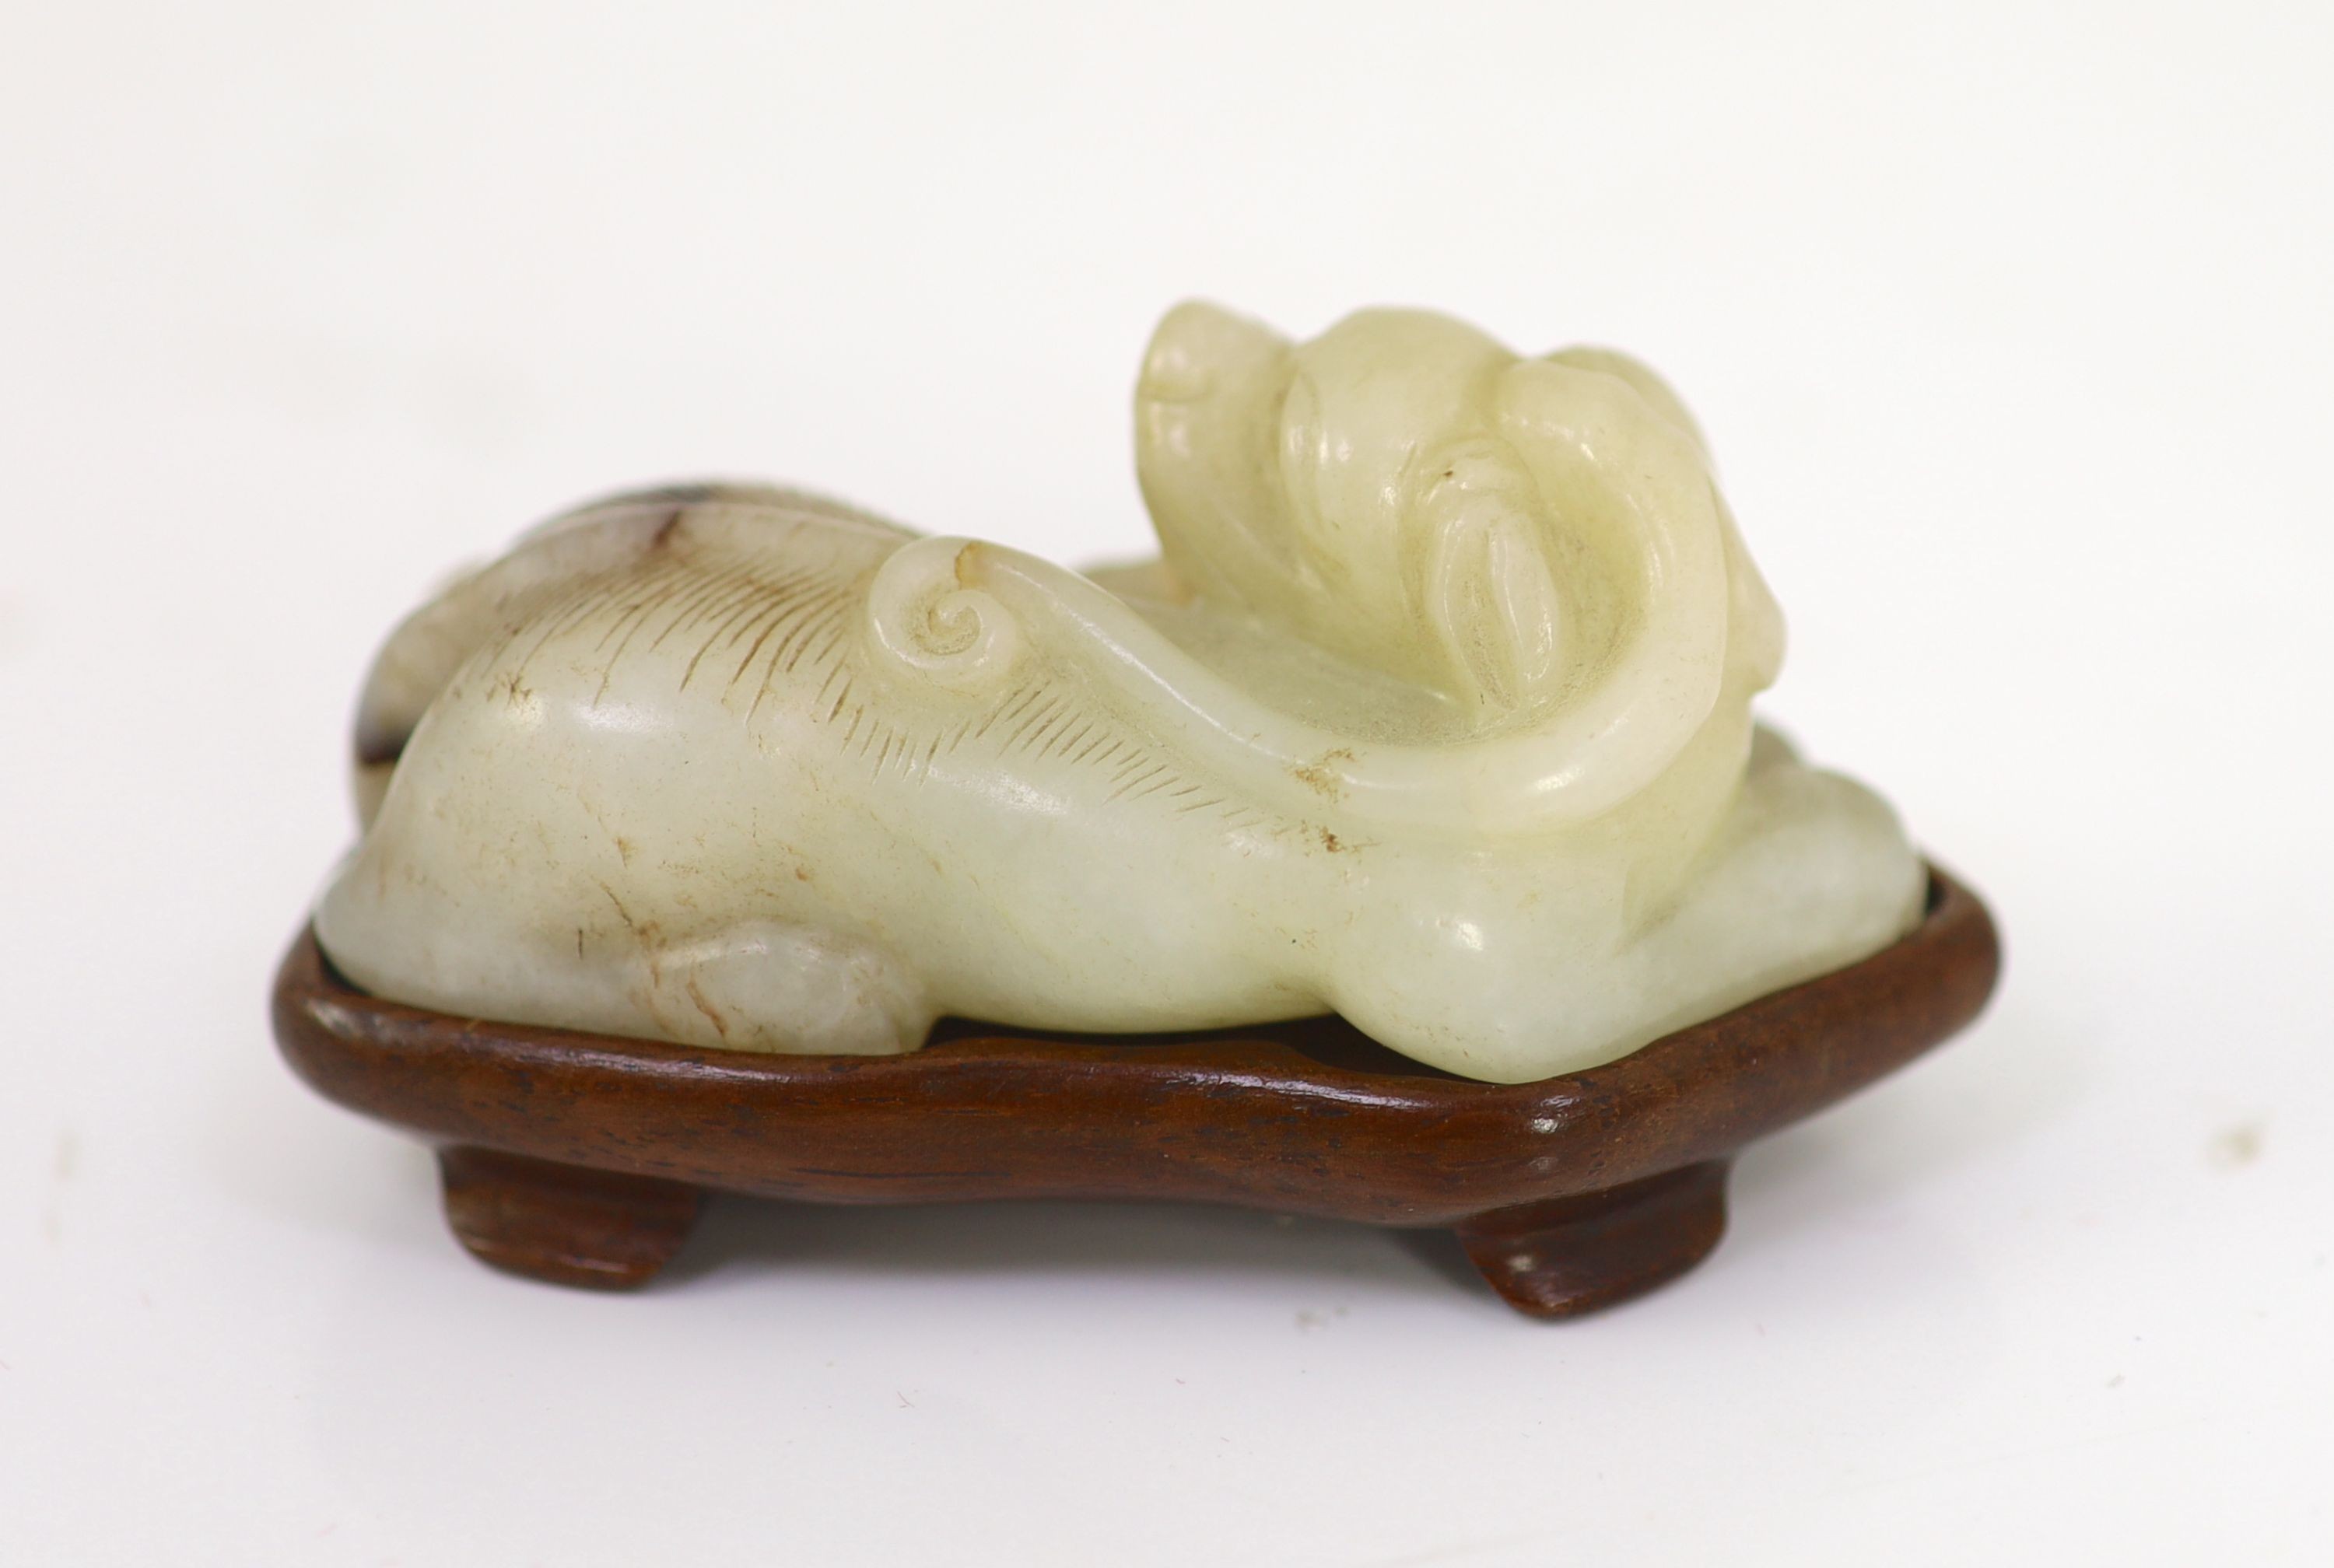 A Chinese pale celadon and brown jade figure of a lion-dog, 18th/19th century, 6.7cm long, wood stand